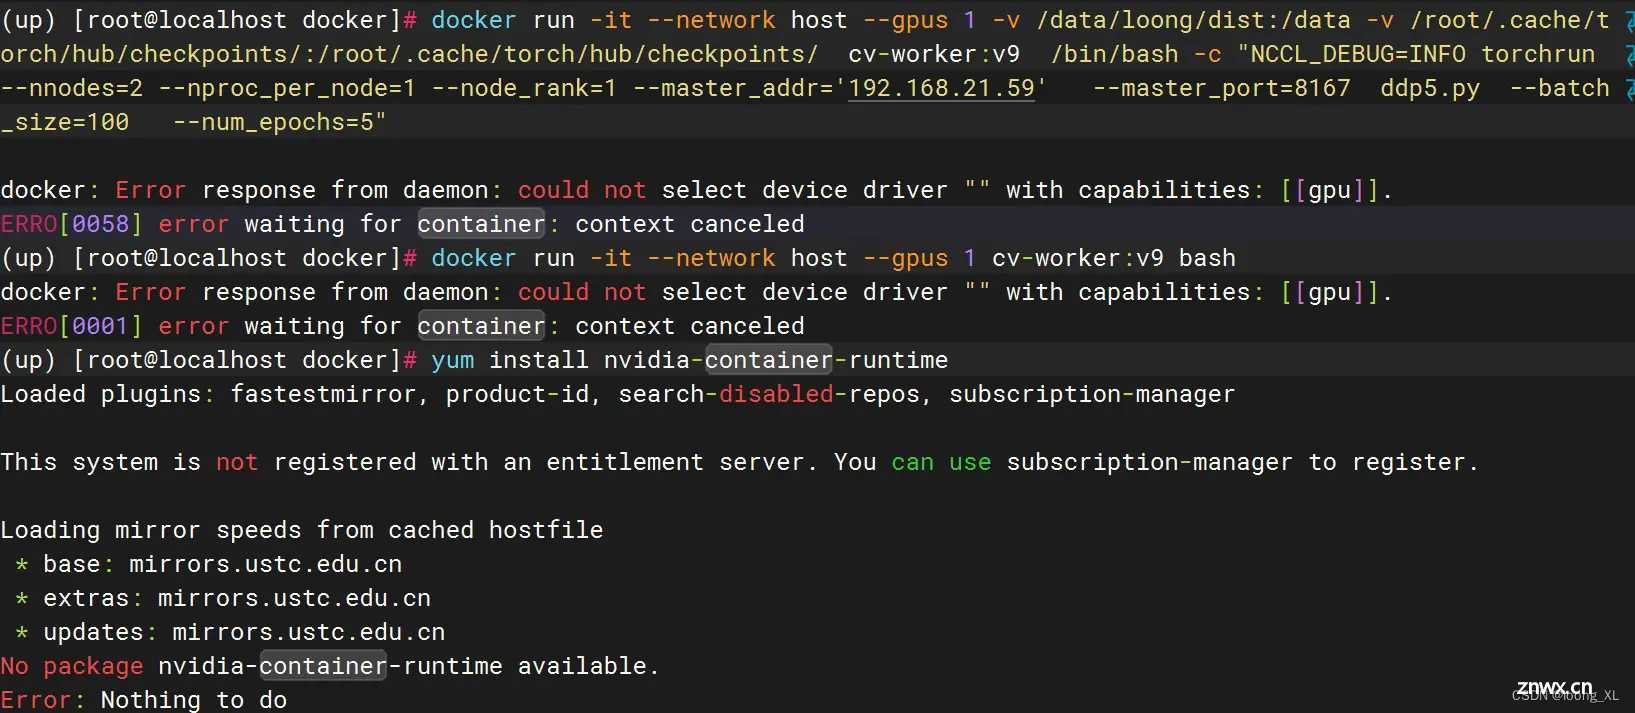 docker: Error response from daemon: could not select device driver ““ with capabilities: [[gpu]]